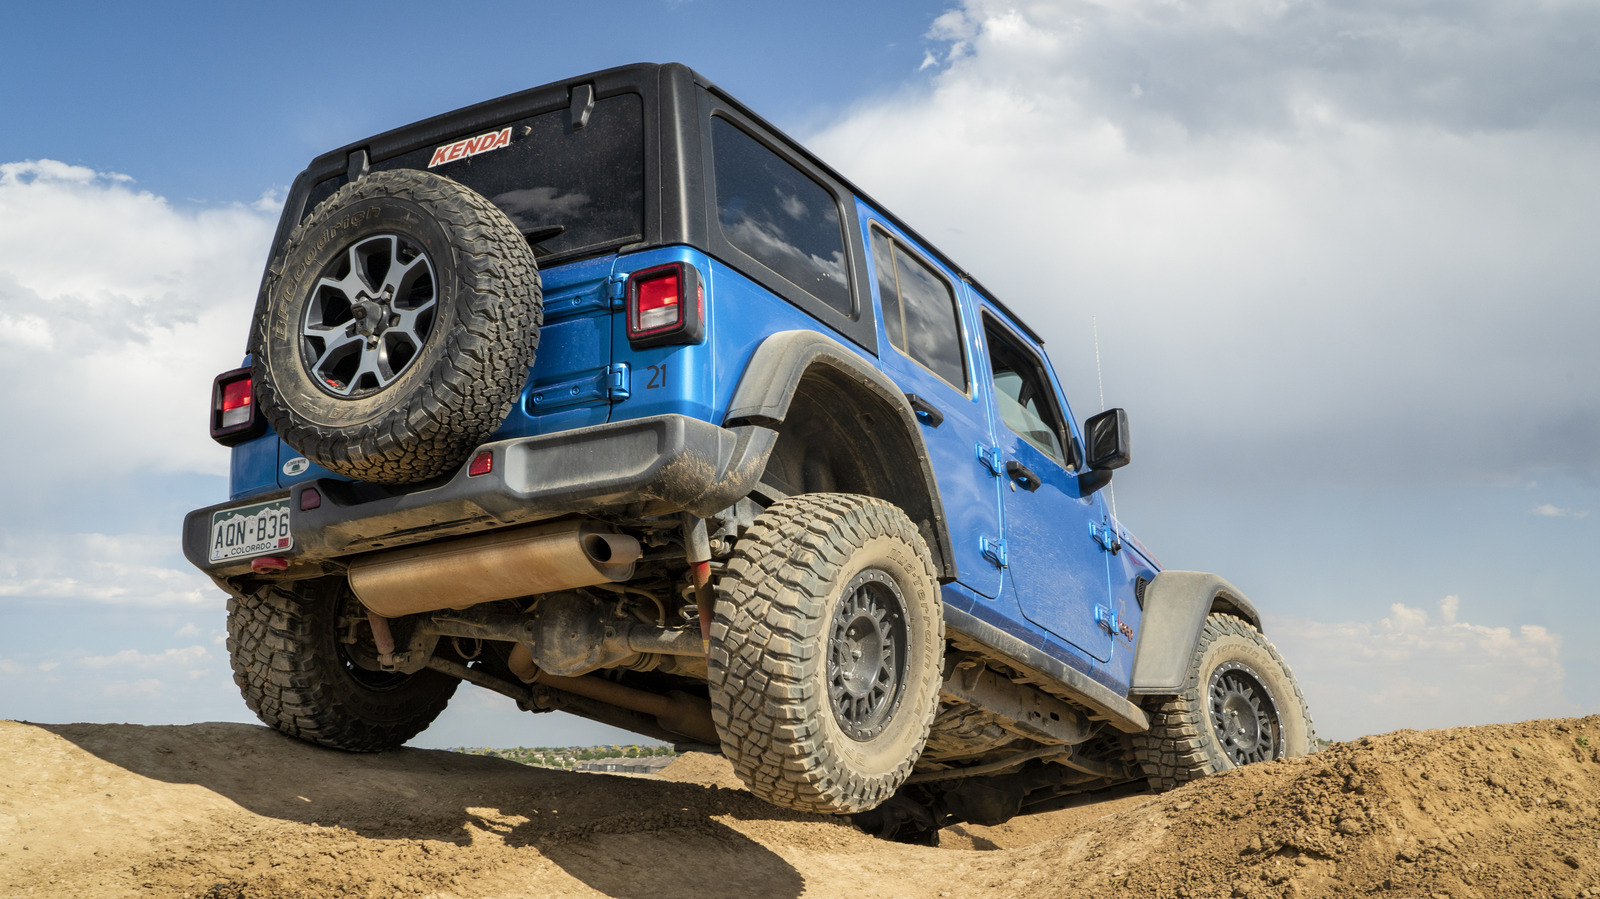 What's The Difference Between The Jeep Wrangler And A Rubicon?